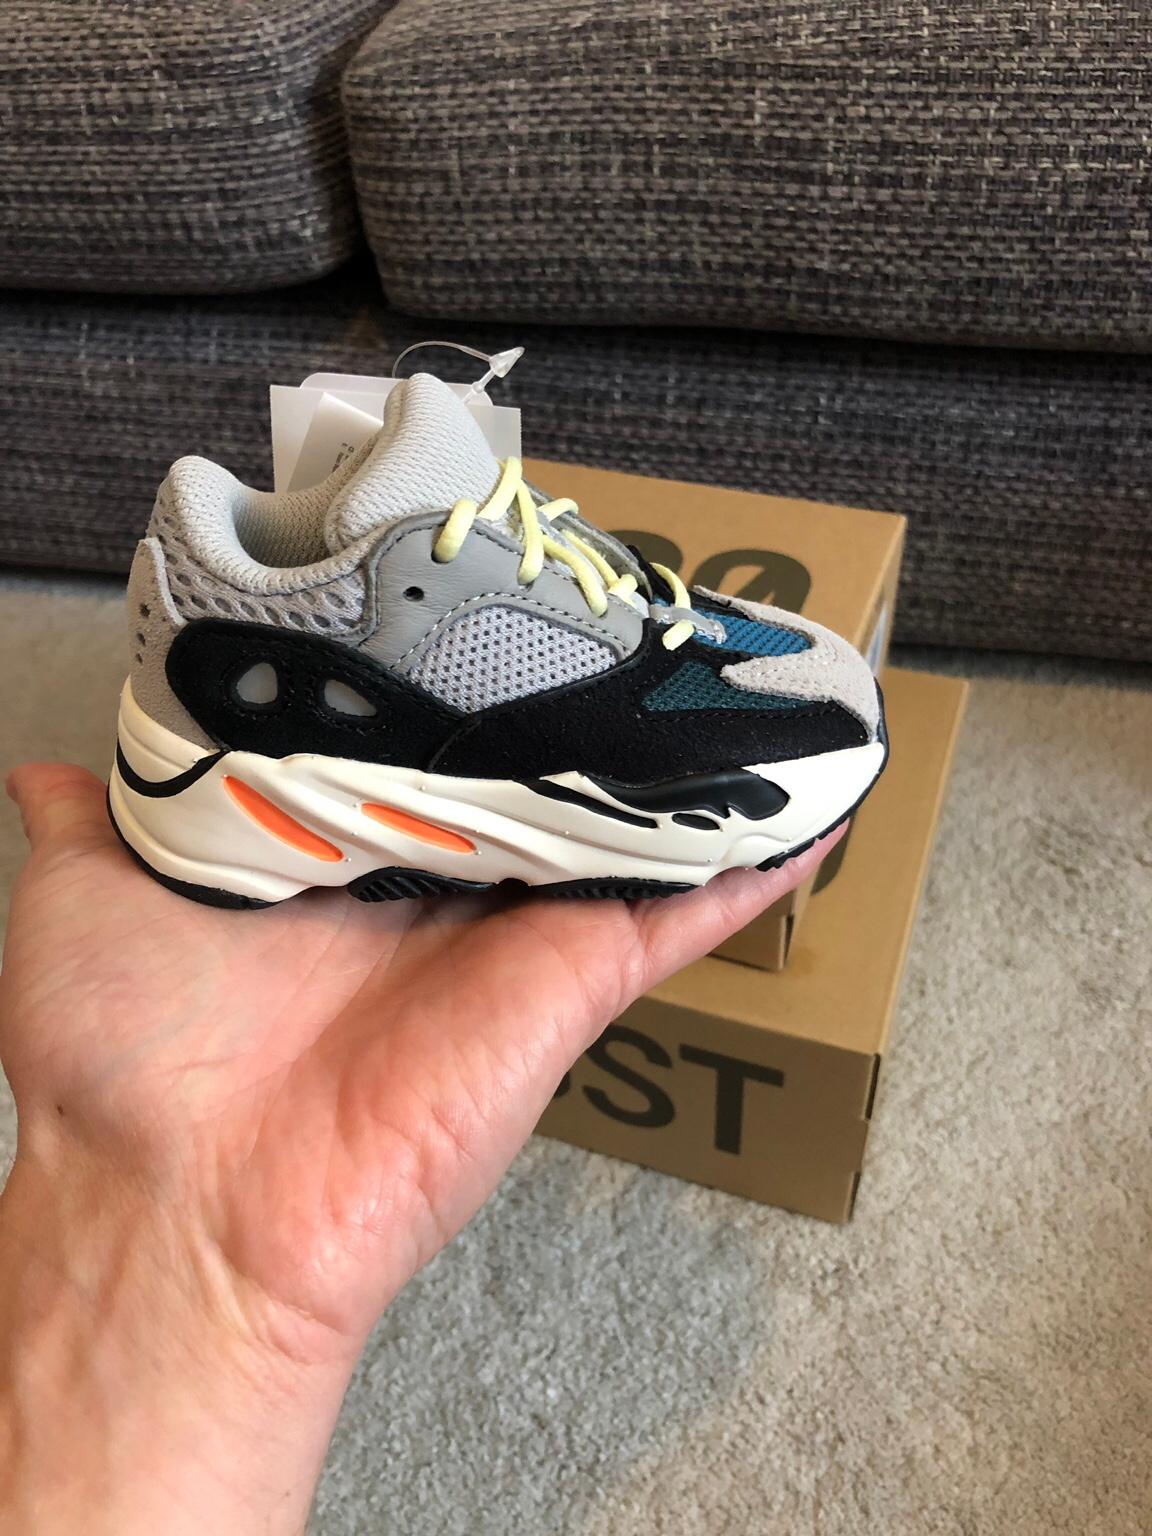 yeezy 700 for baby